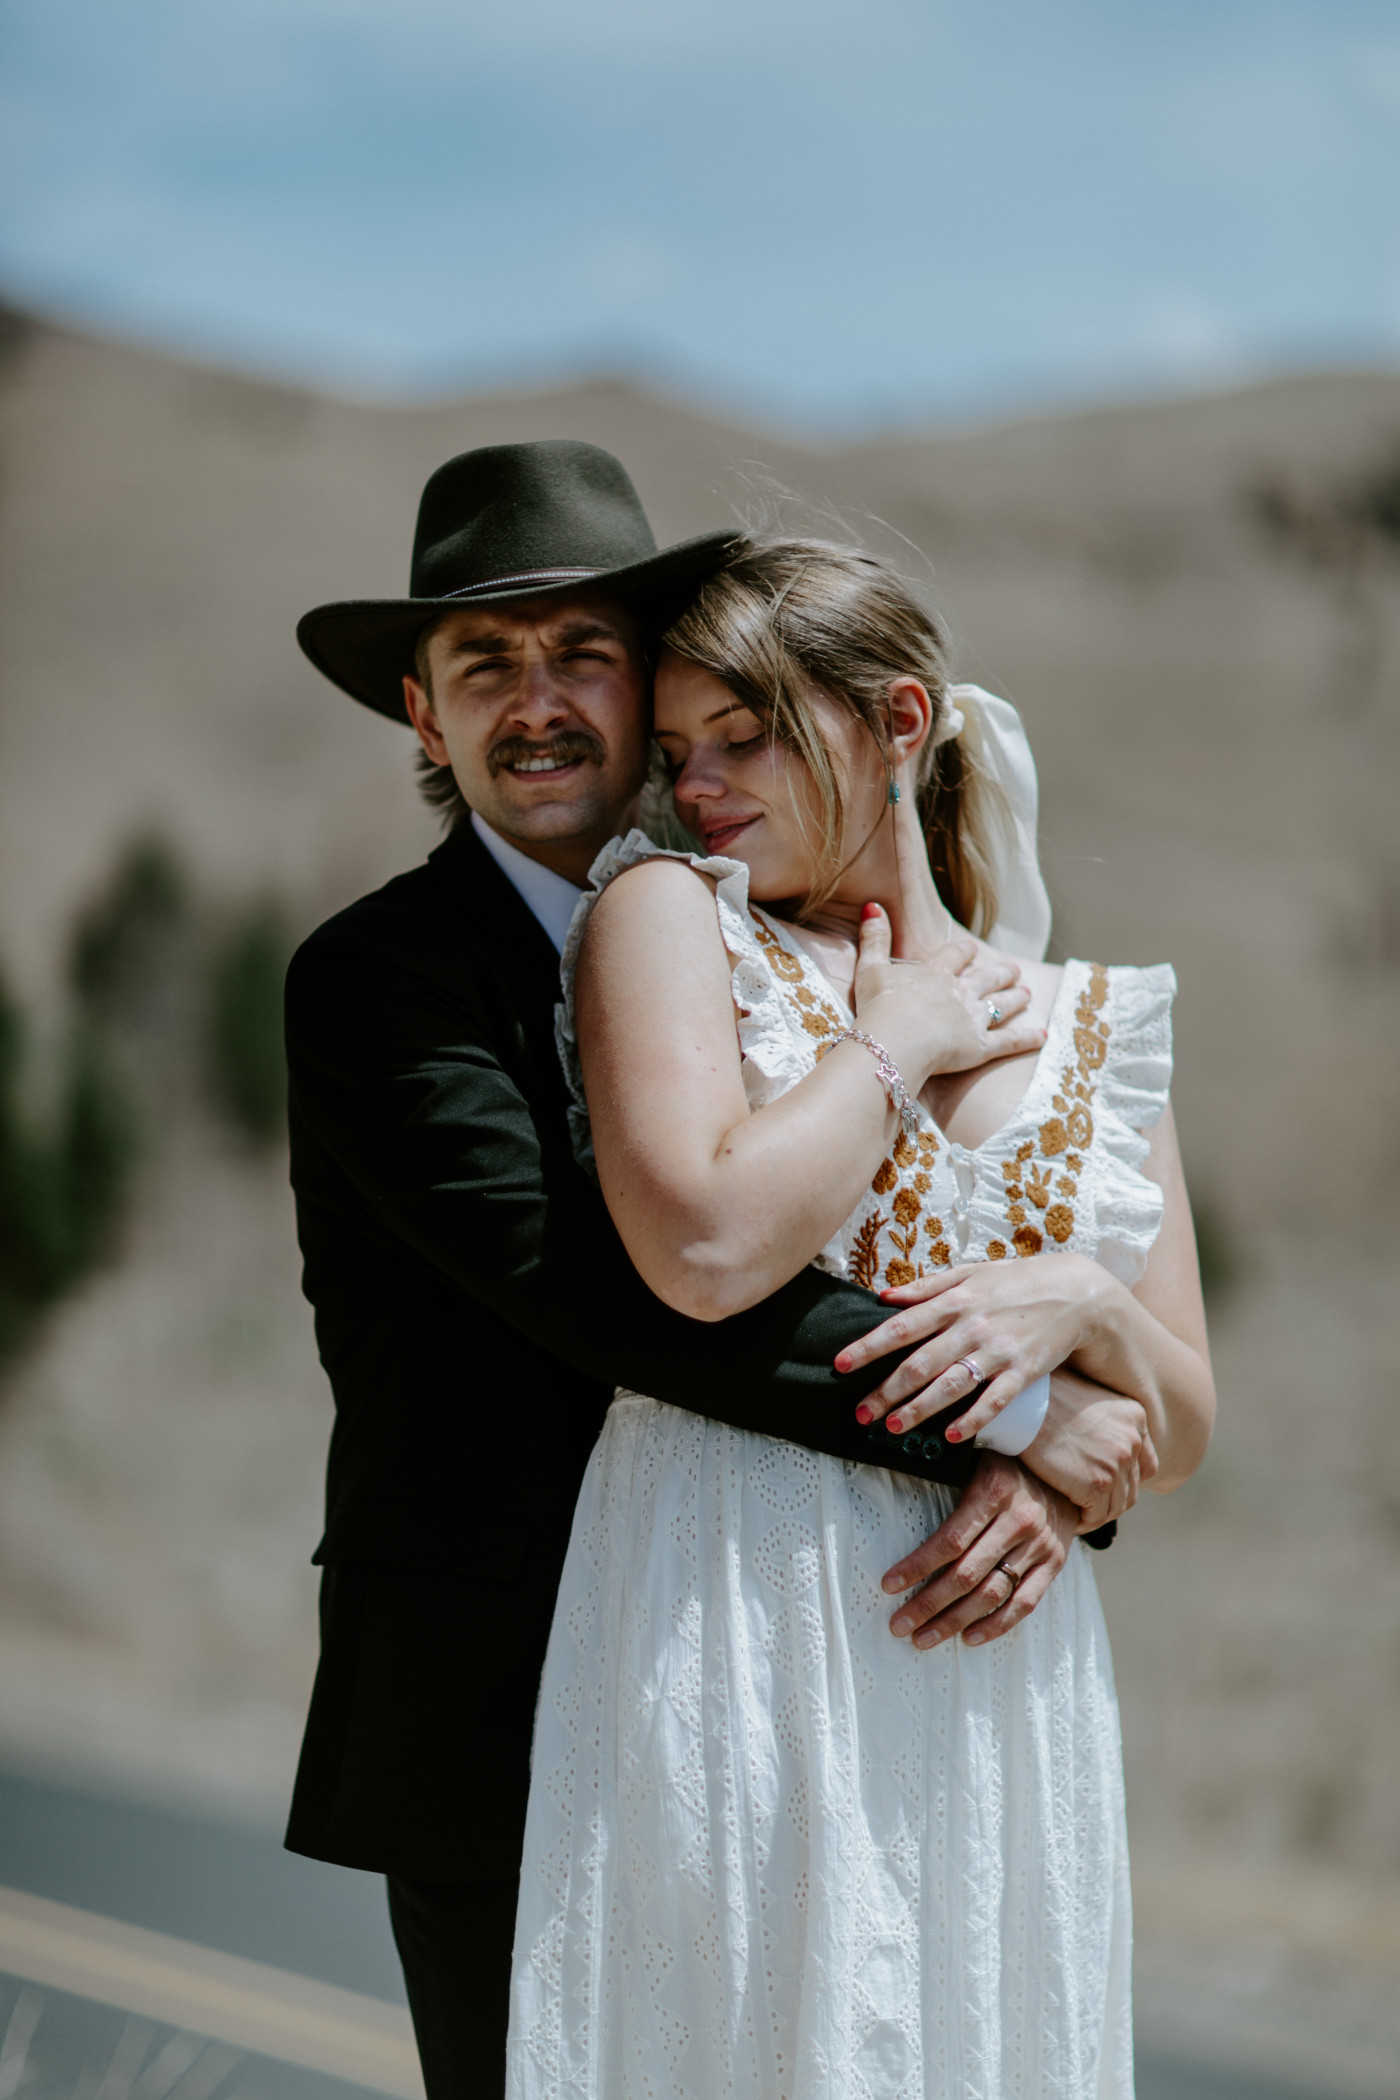 Emily and Greyson hug. Elopement photography in the Central Oregon desert by Sienna Plus Josh.